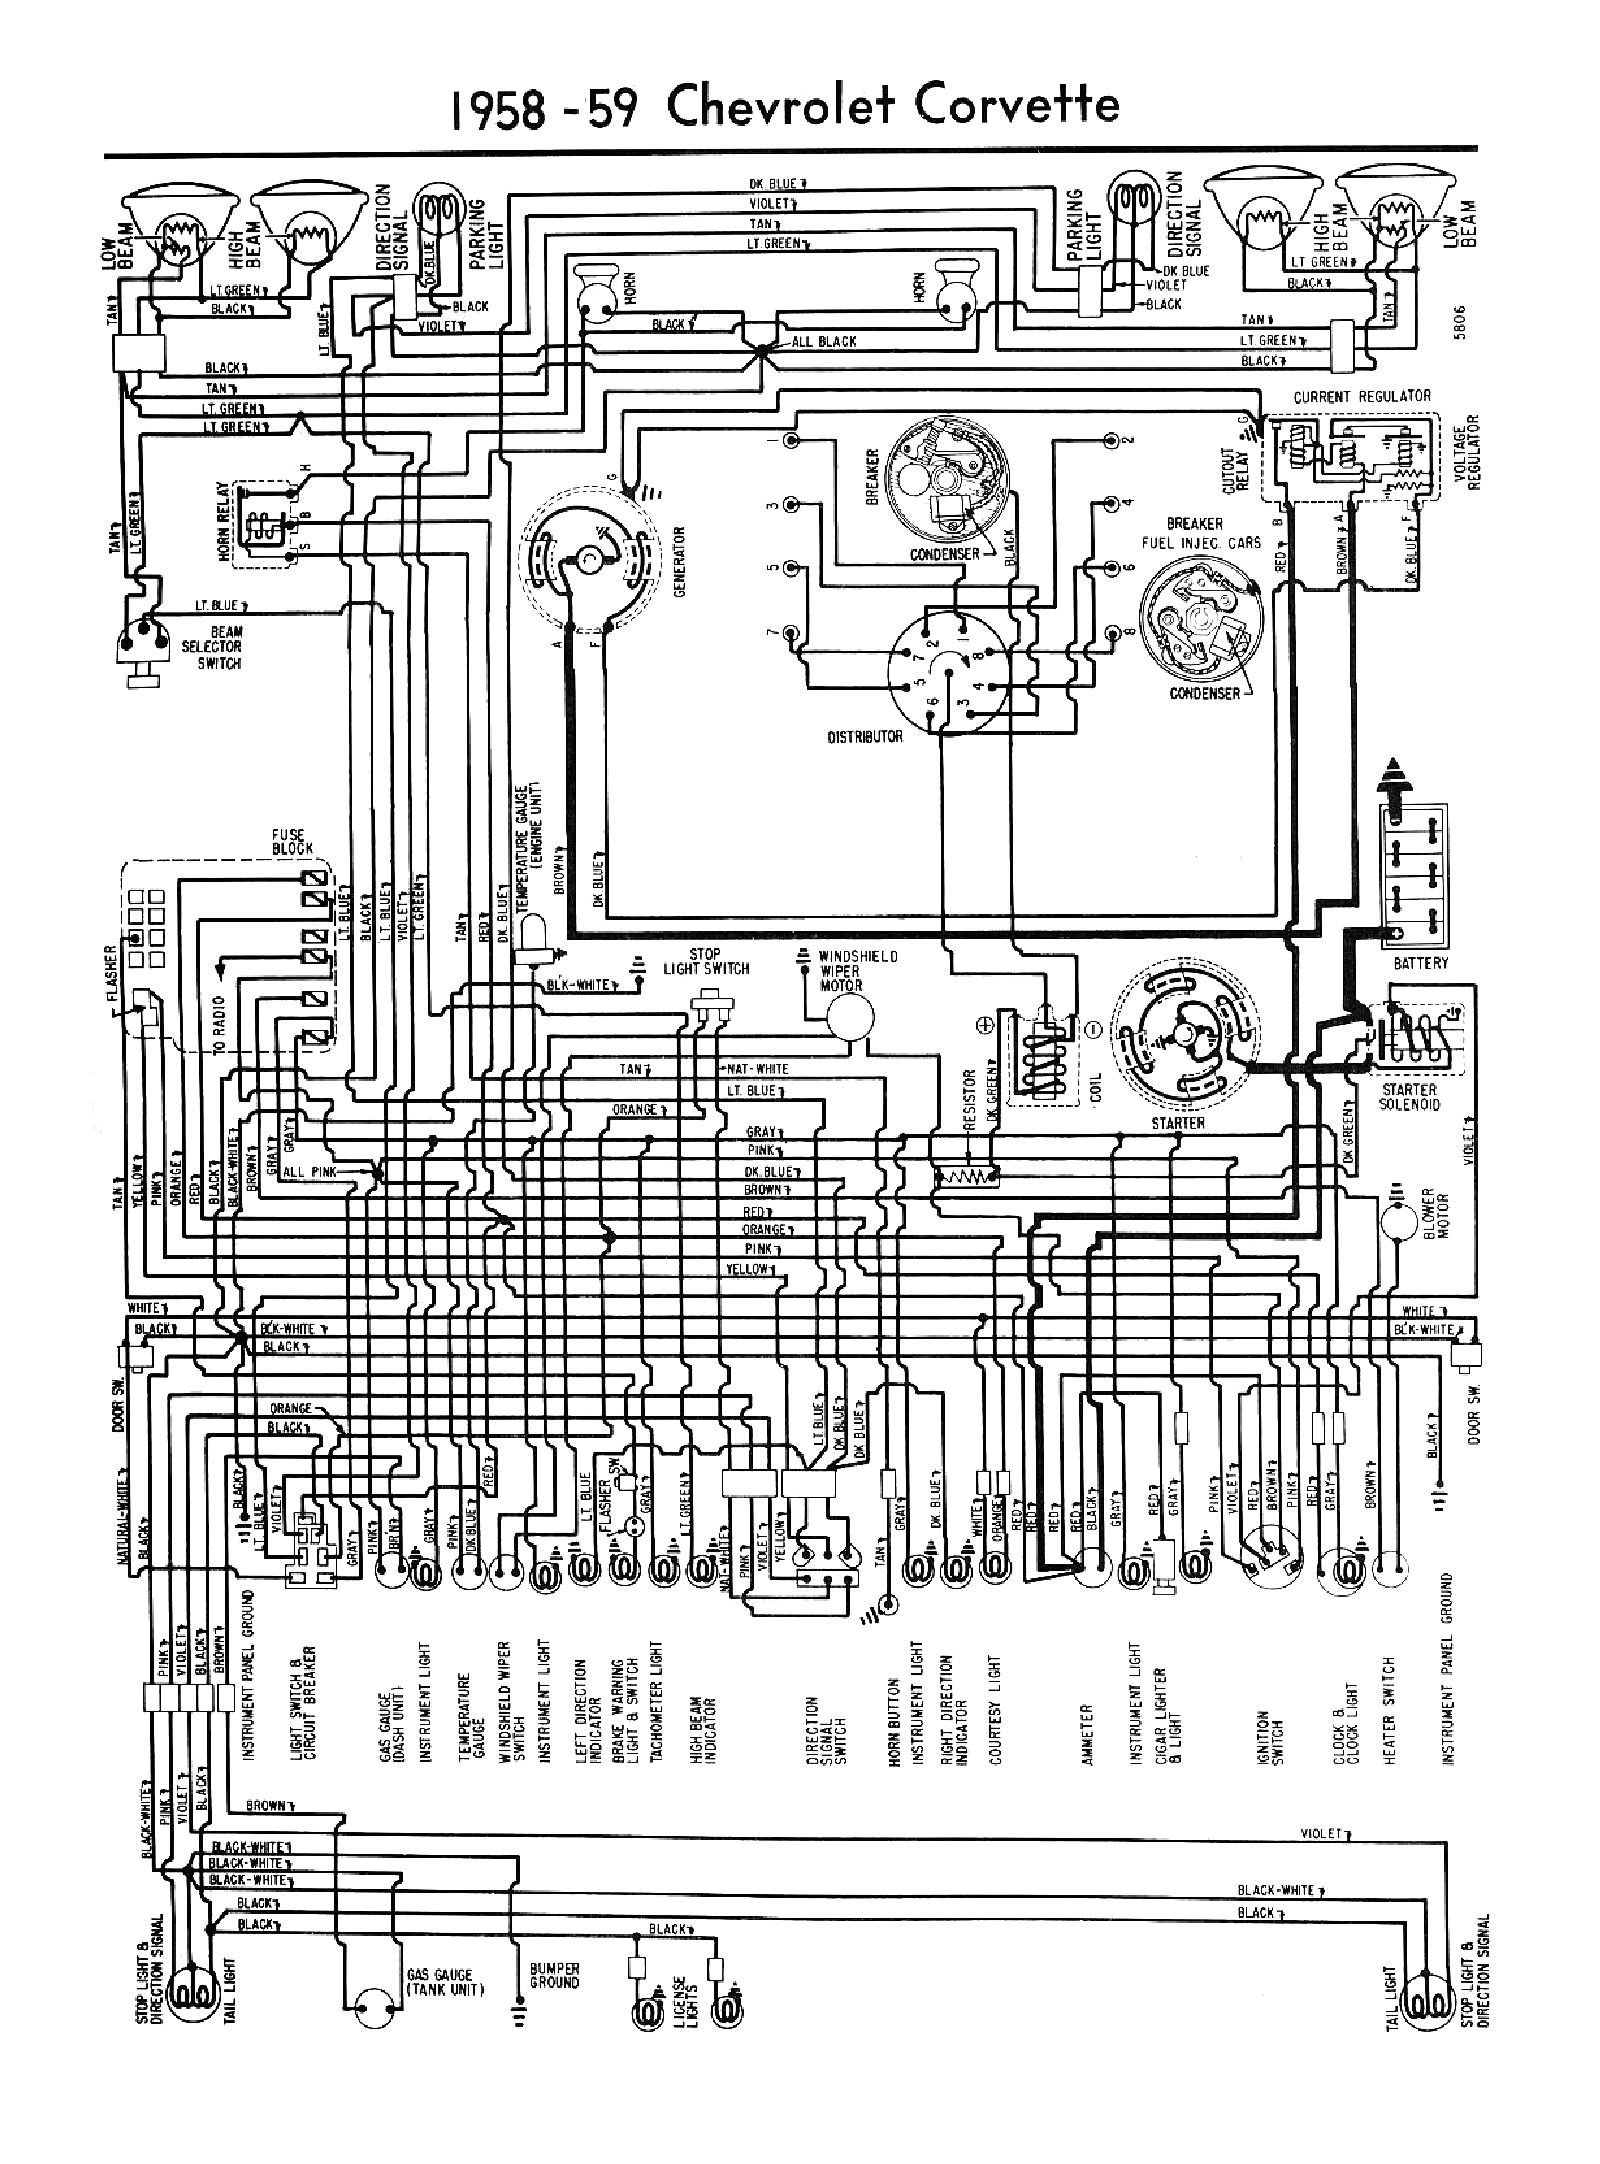 1980 Corvette Wiring Diagram Pdf Diagram together with Chassis Electrical Wiring Diagrams